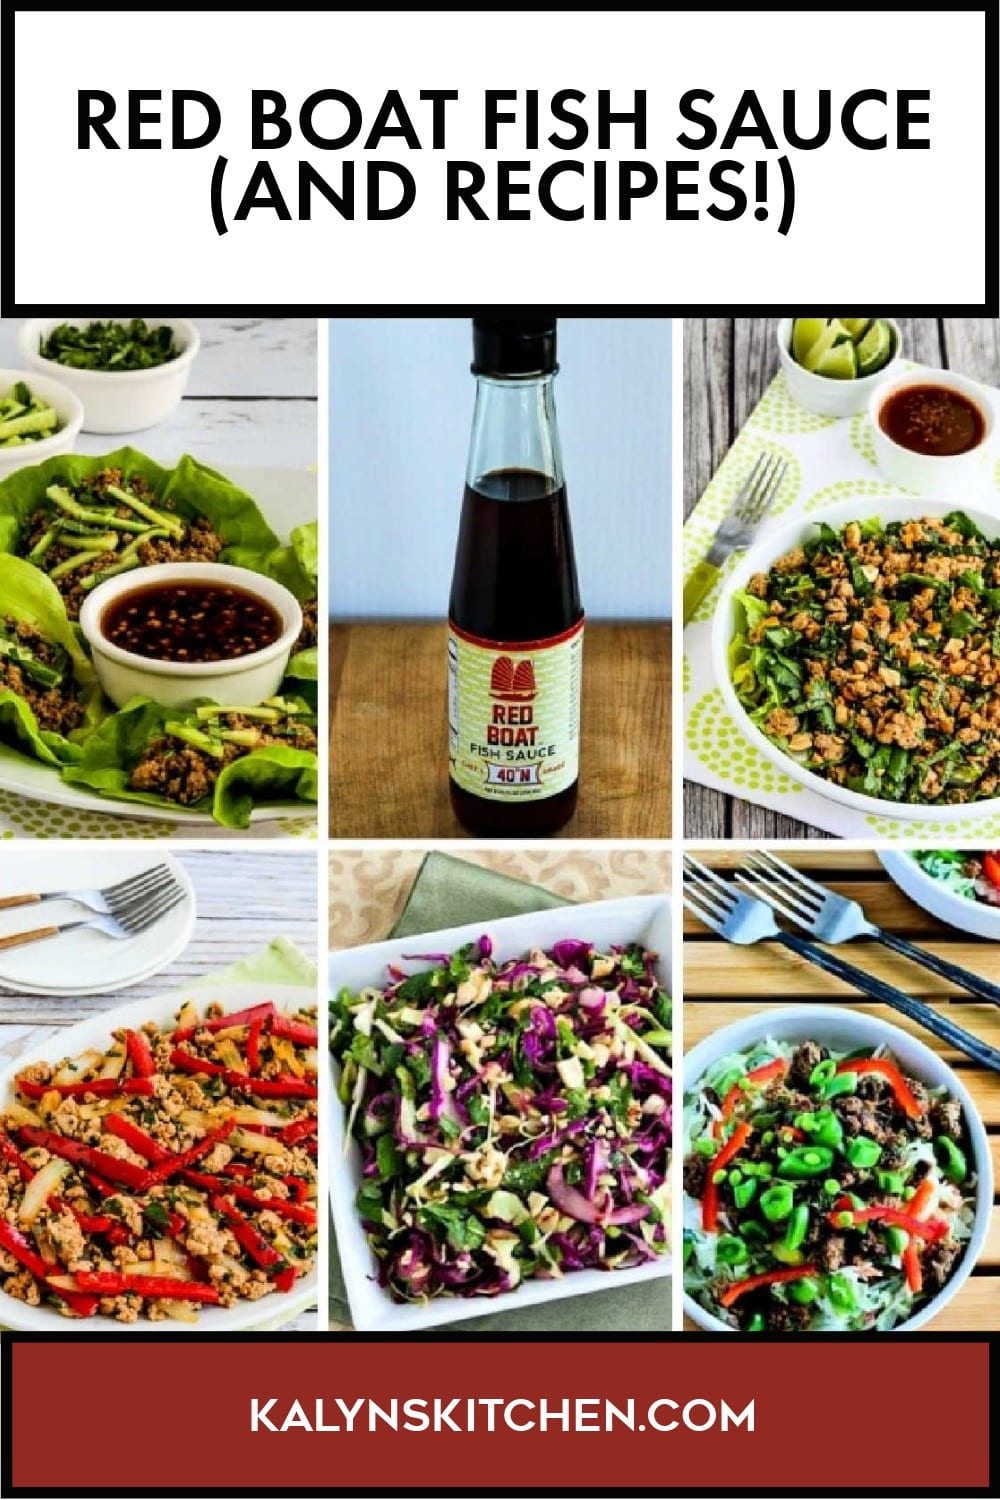 Pinterest image of Red Boat Fish Sauce (and Recipes!)